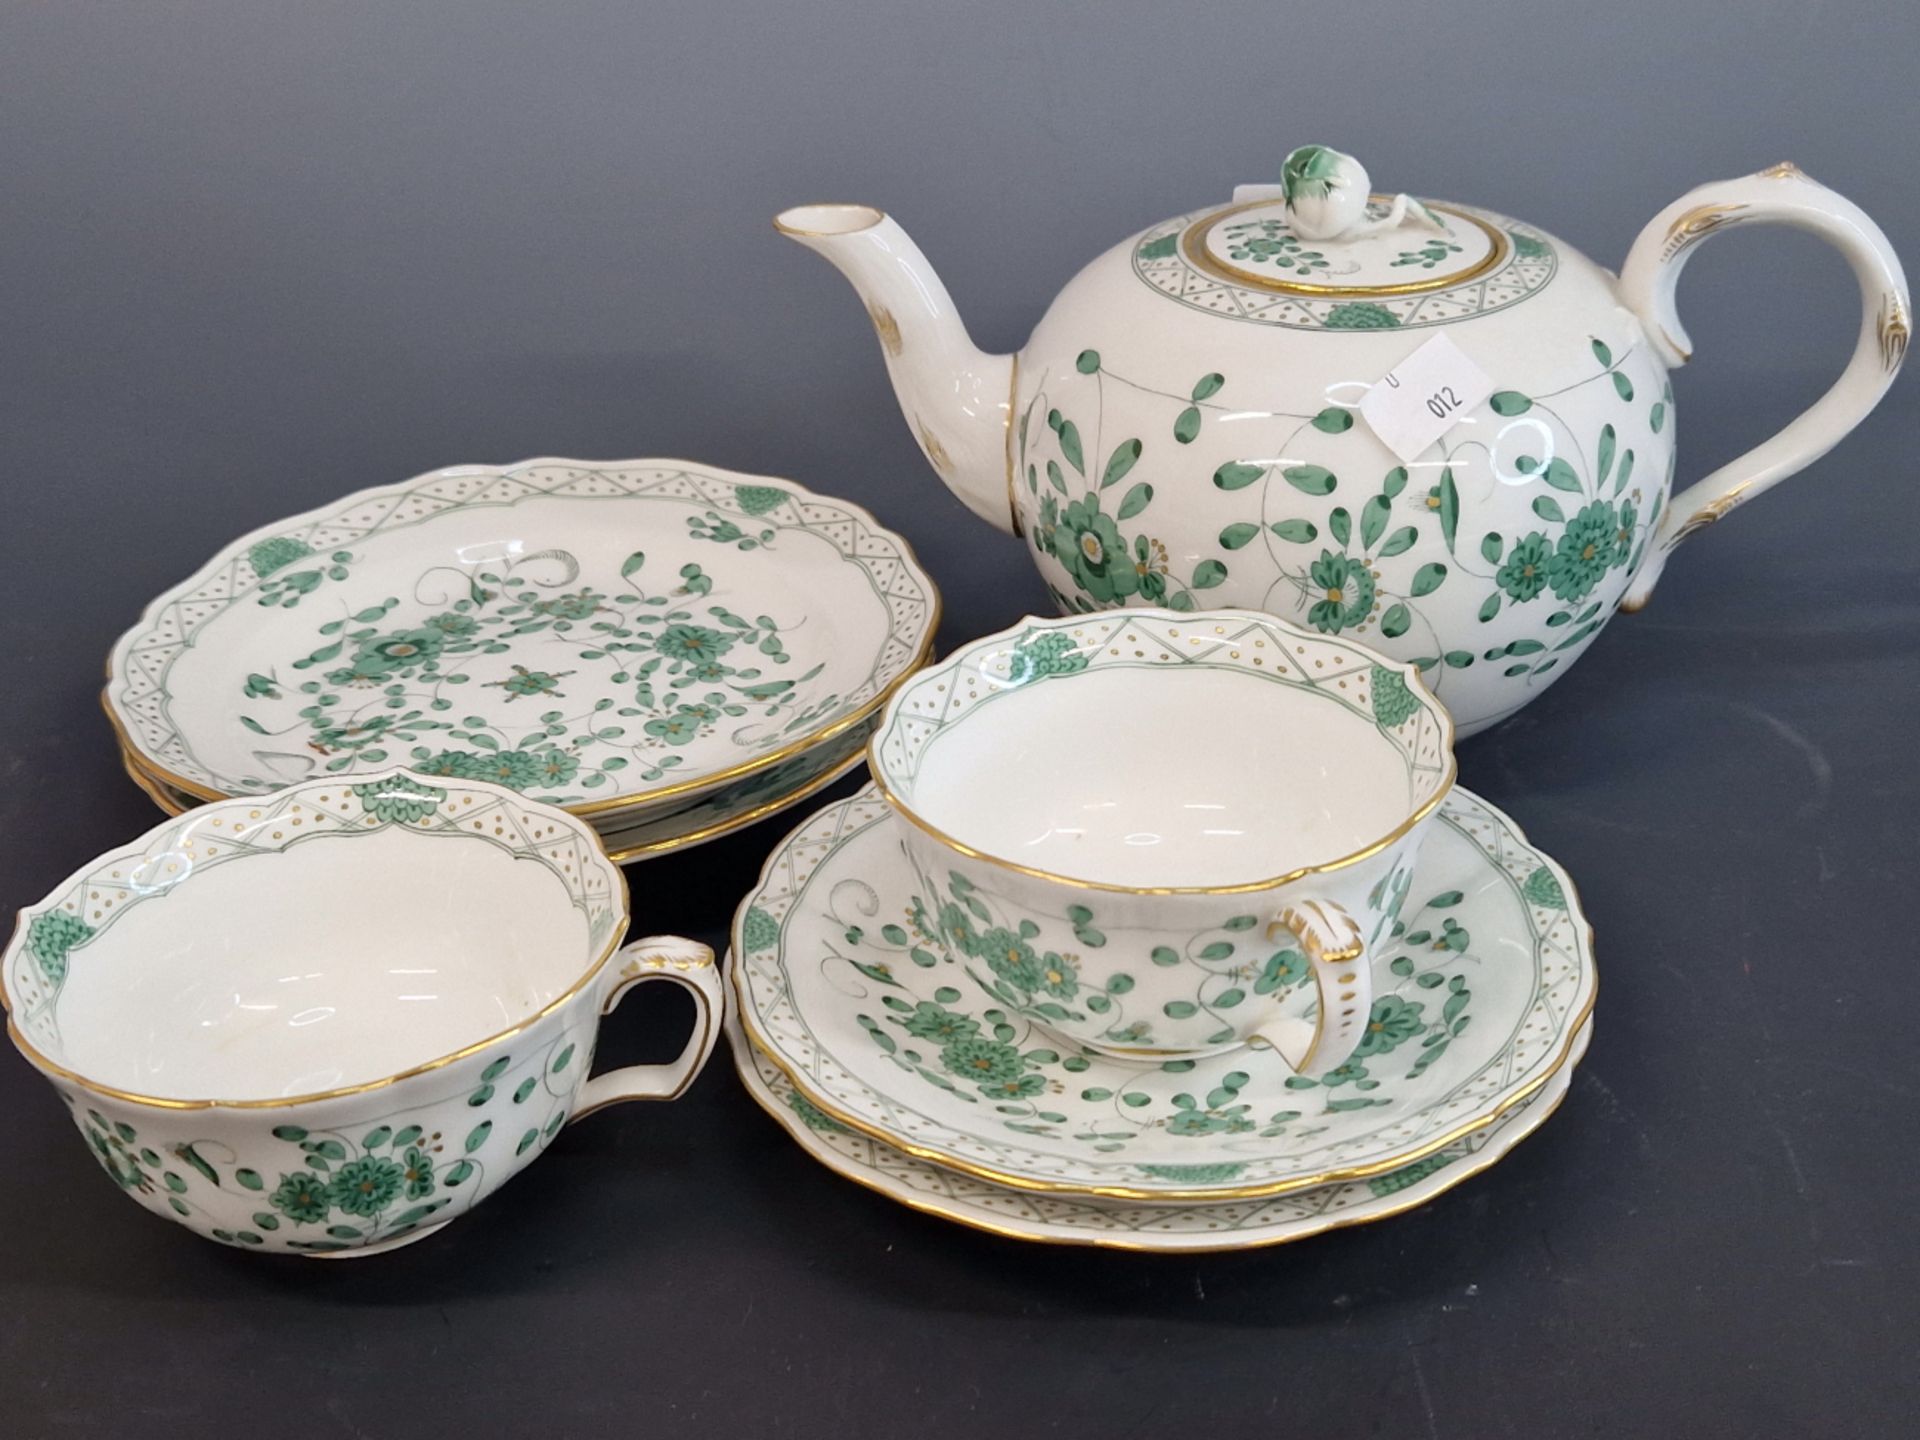 A MEISSEN GREEN ONION PATTERN TEA POT, TWO CUPS, SAUCERS AND TEA PLATES TOGTHER WITH AN IMARI - Image 4 of 7